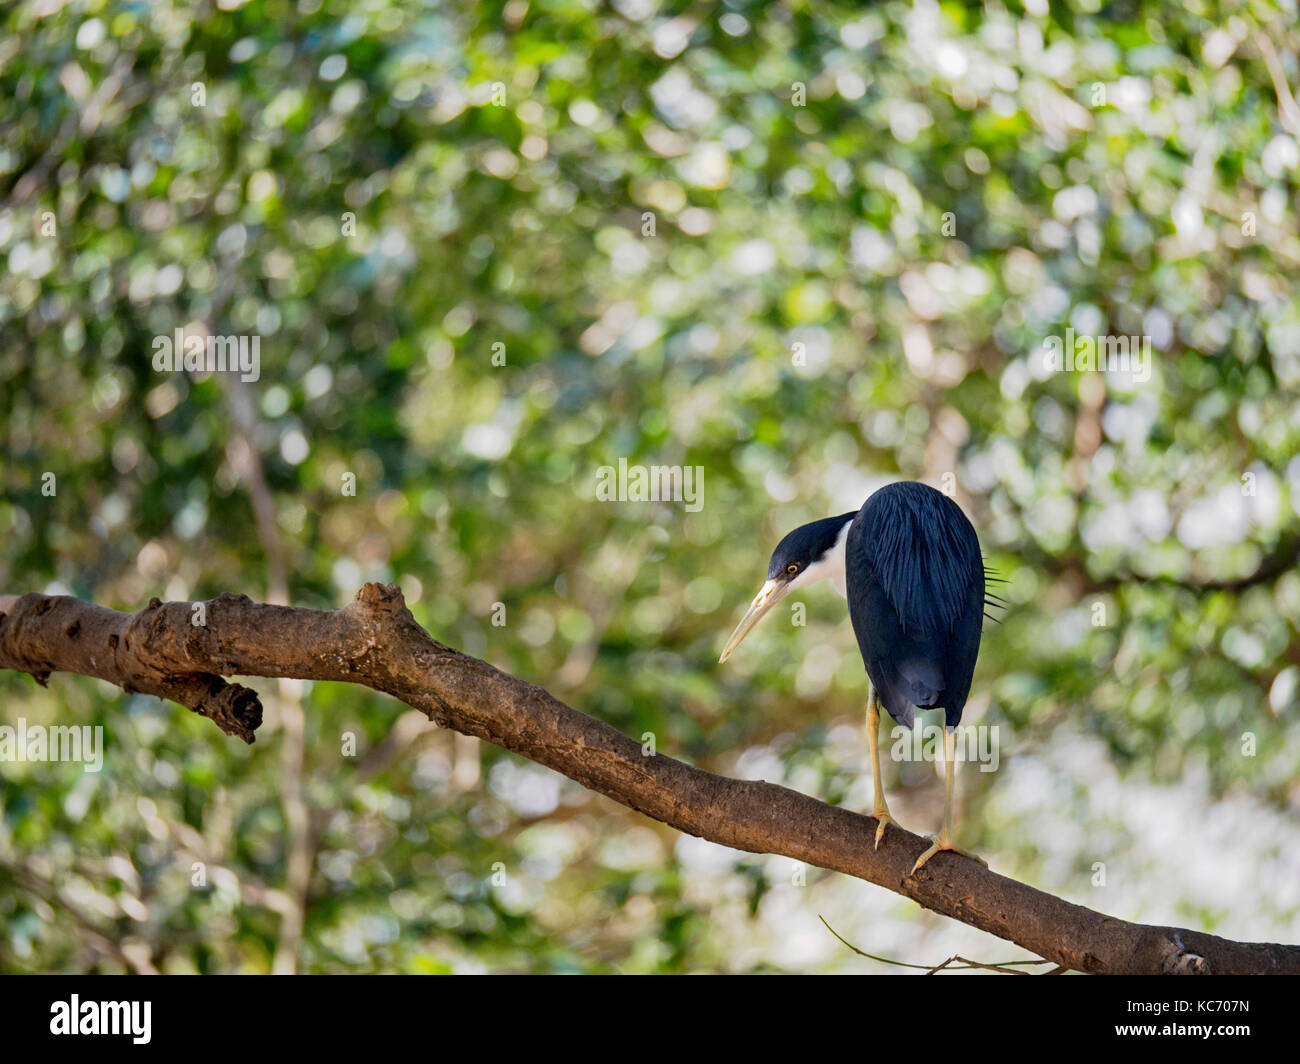 Heron (Ardea picata pied) perching on branch Banque D'Images